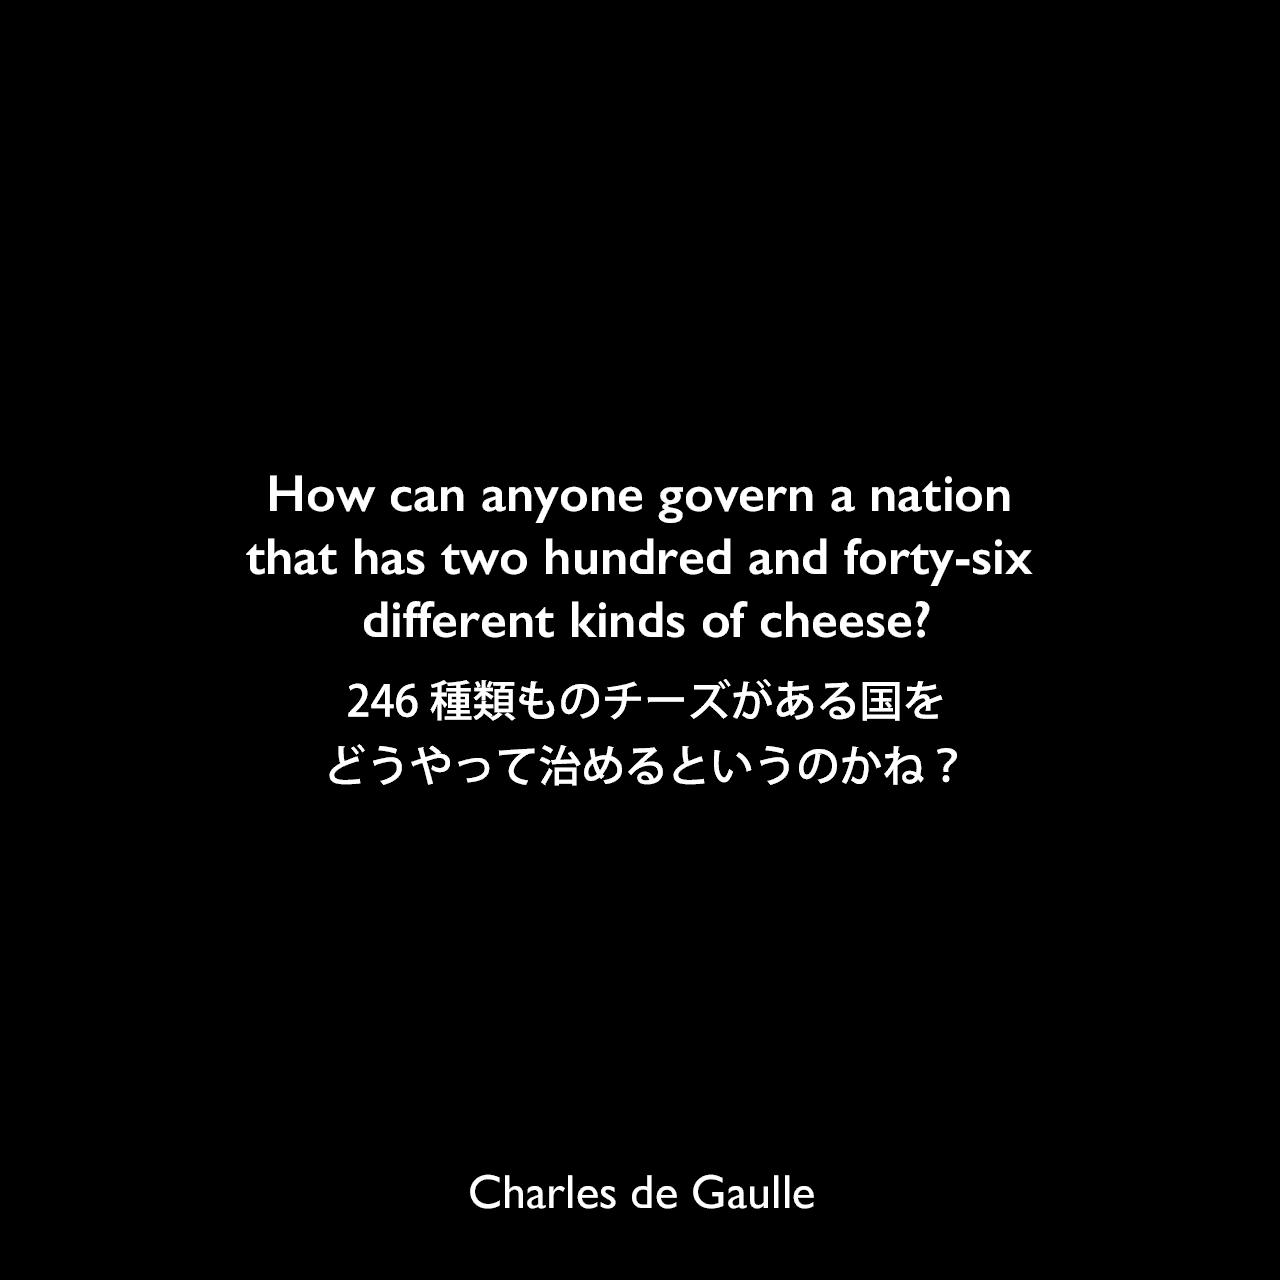 How can anyone govern a nation that has two hundred and forty-six different kinds of cheese?246種類ものチーズがある国をどうやって治めるというのかね？Charles de Gaulle